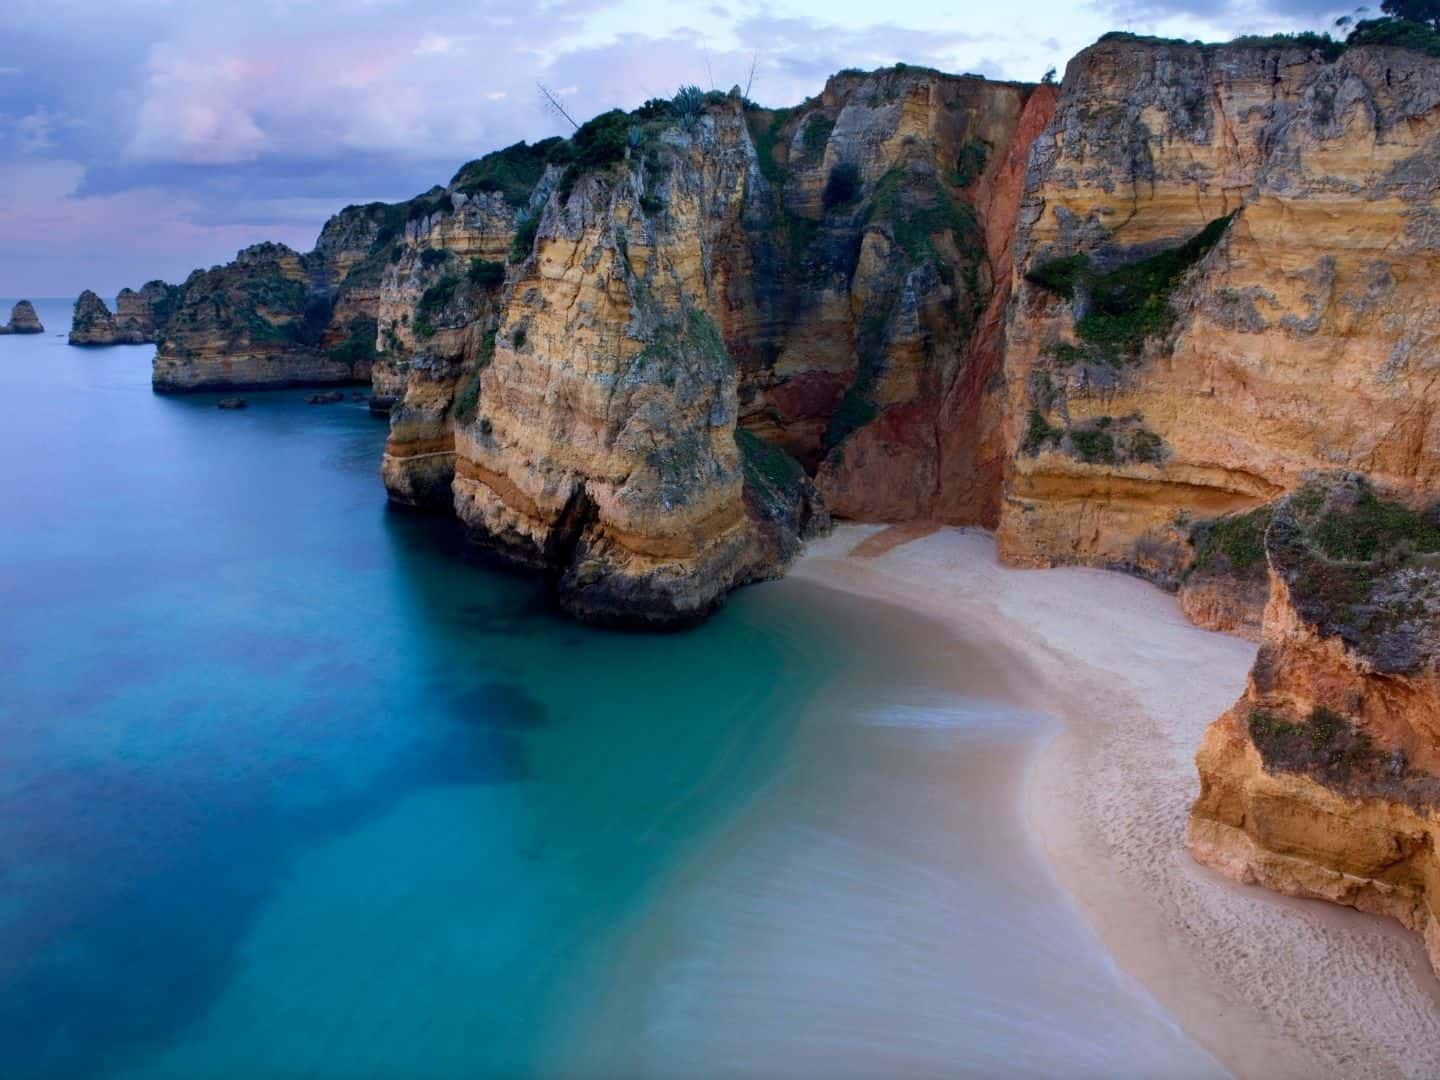 Cities and Towns In the Algarve You Should Visit During Your Holiday